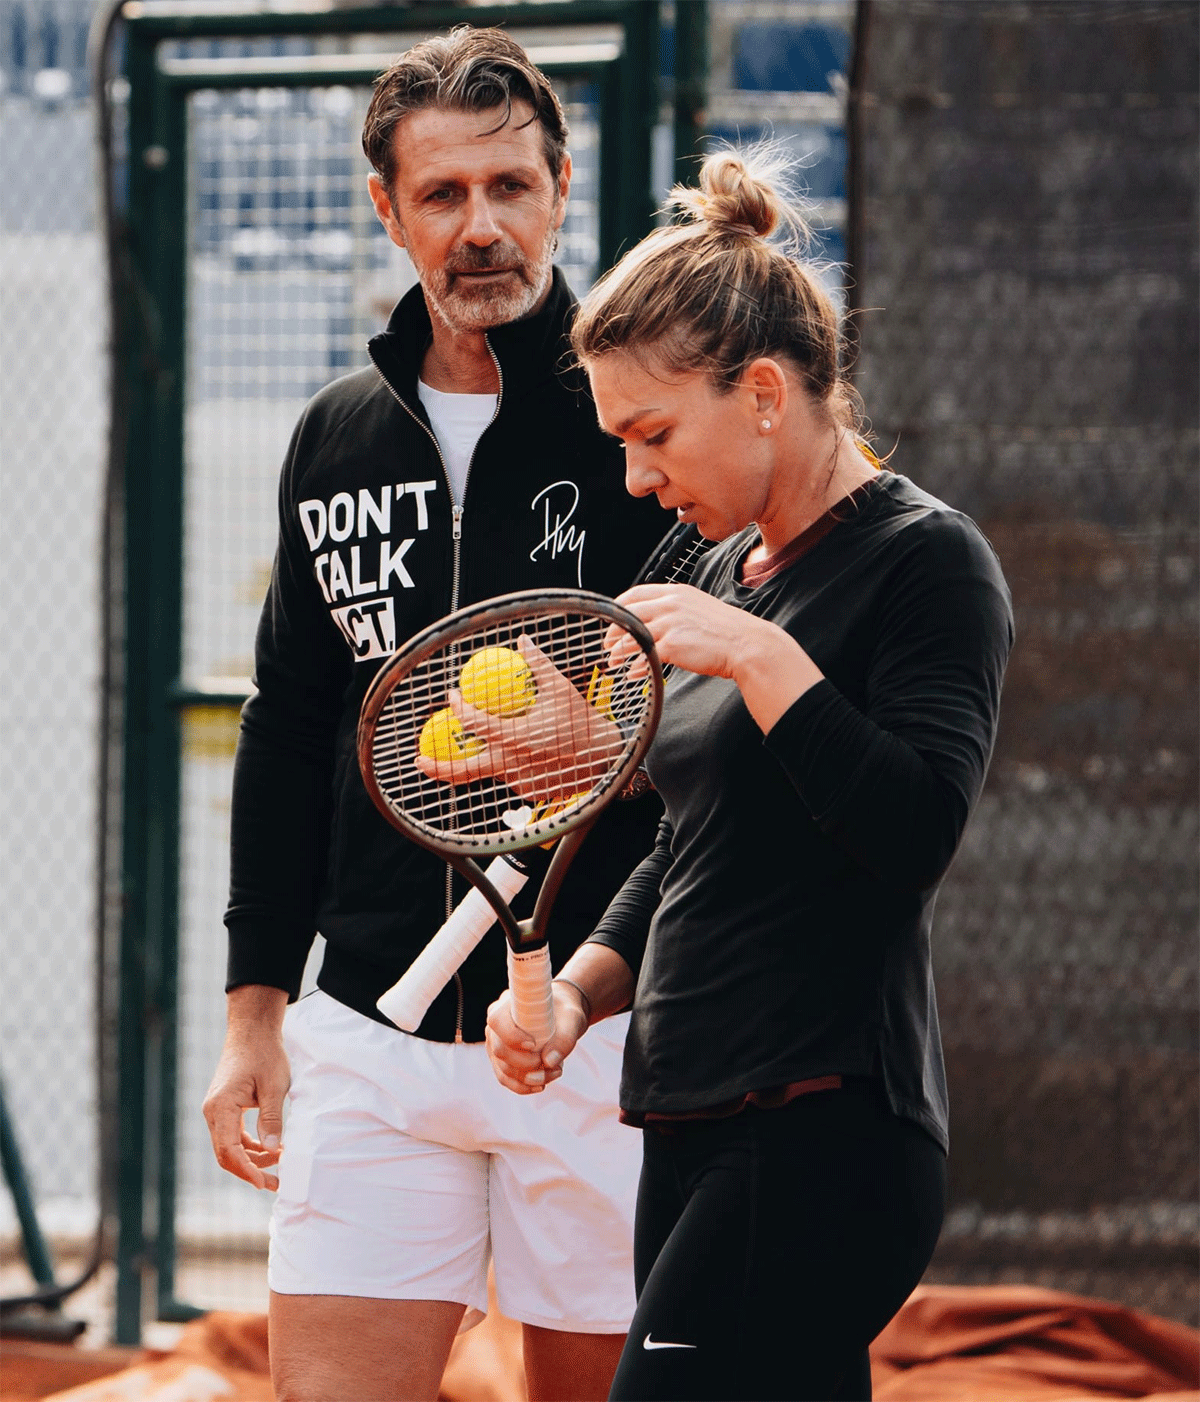 Simona Halep says she has taken heart from the support of the public and her coach Patrick Mouratoglou who she says has stood by her through every step of the process.